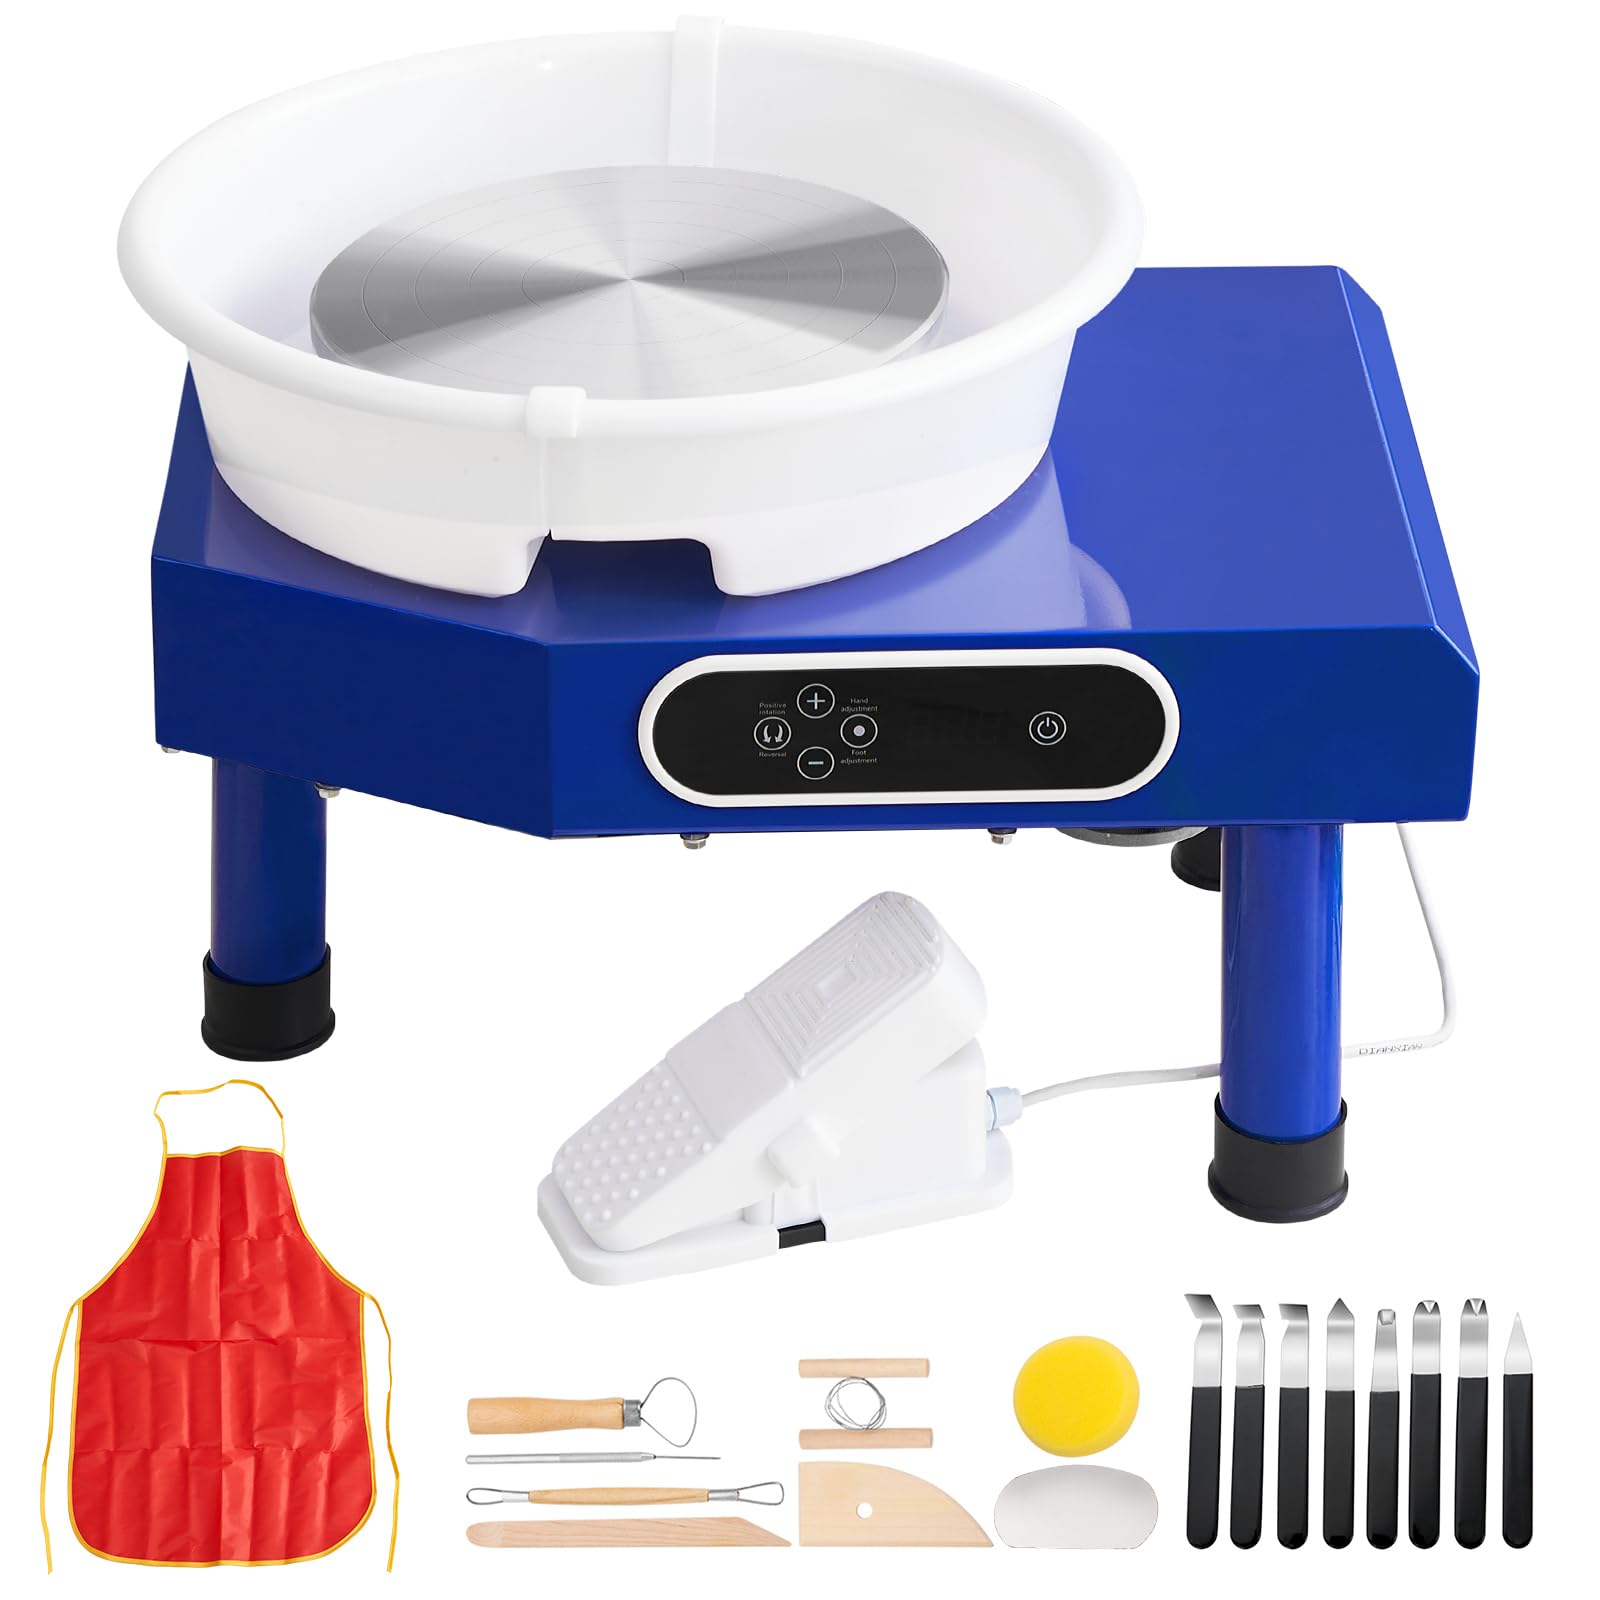 VEVOR Pottery Wheel, 10in Ceramic Wheel Forming Machine, Foot Pedal ABS Detachable Basin, 60-300RPM Adjustable Speed Manual LCD Panel, Sculpting Tool Apron Accessory Kit for Work Art Craft DIY